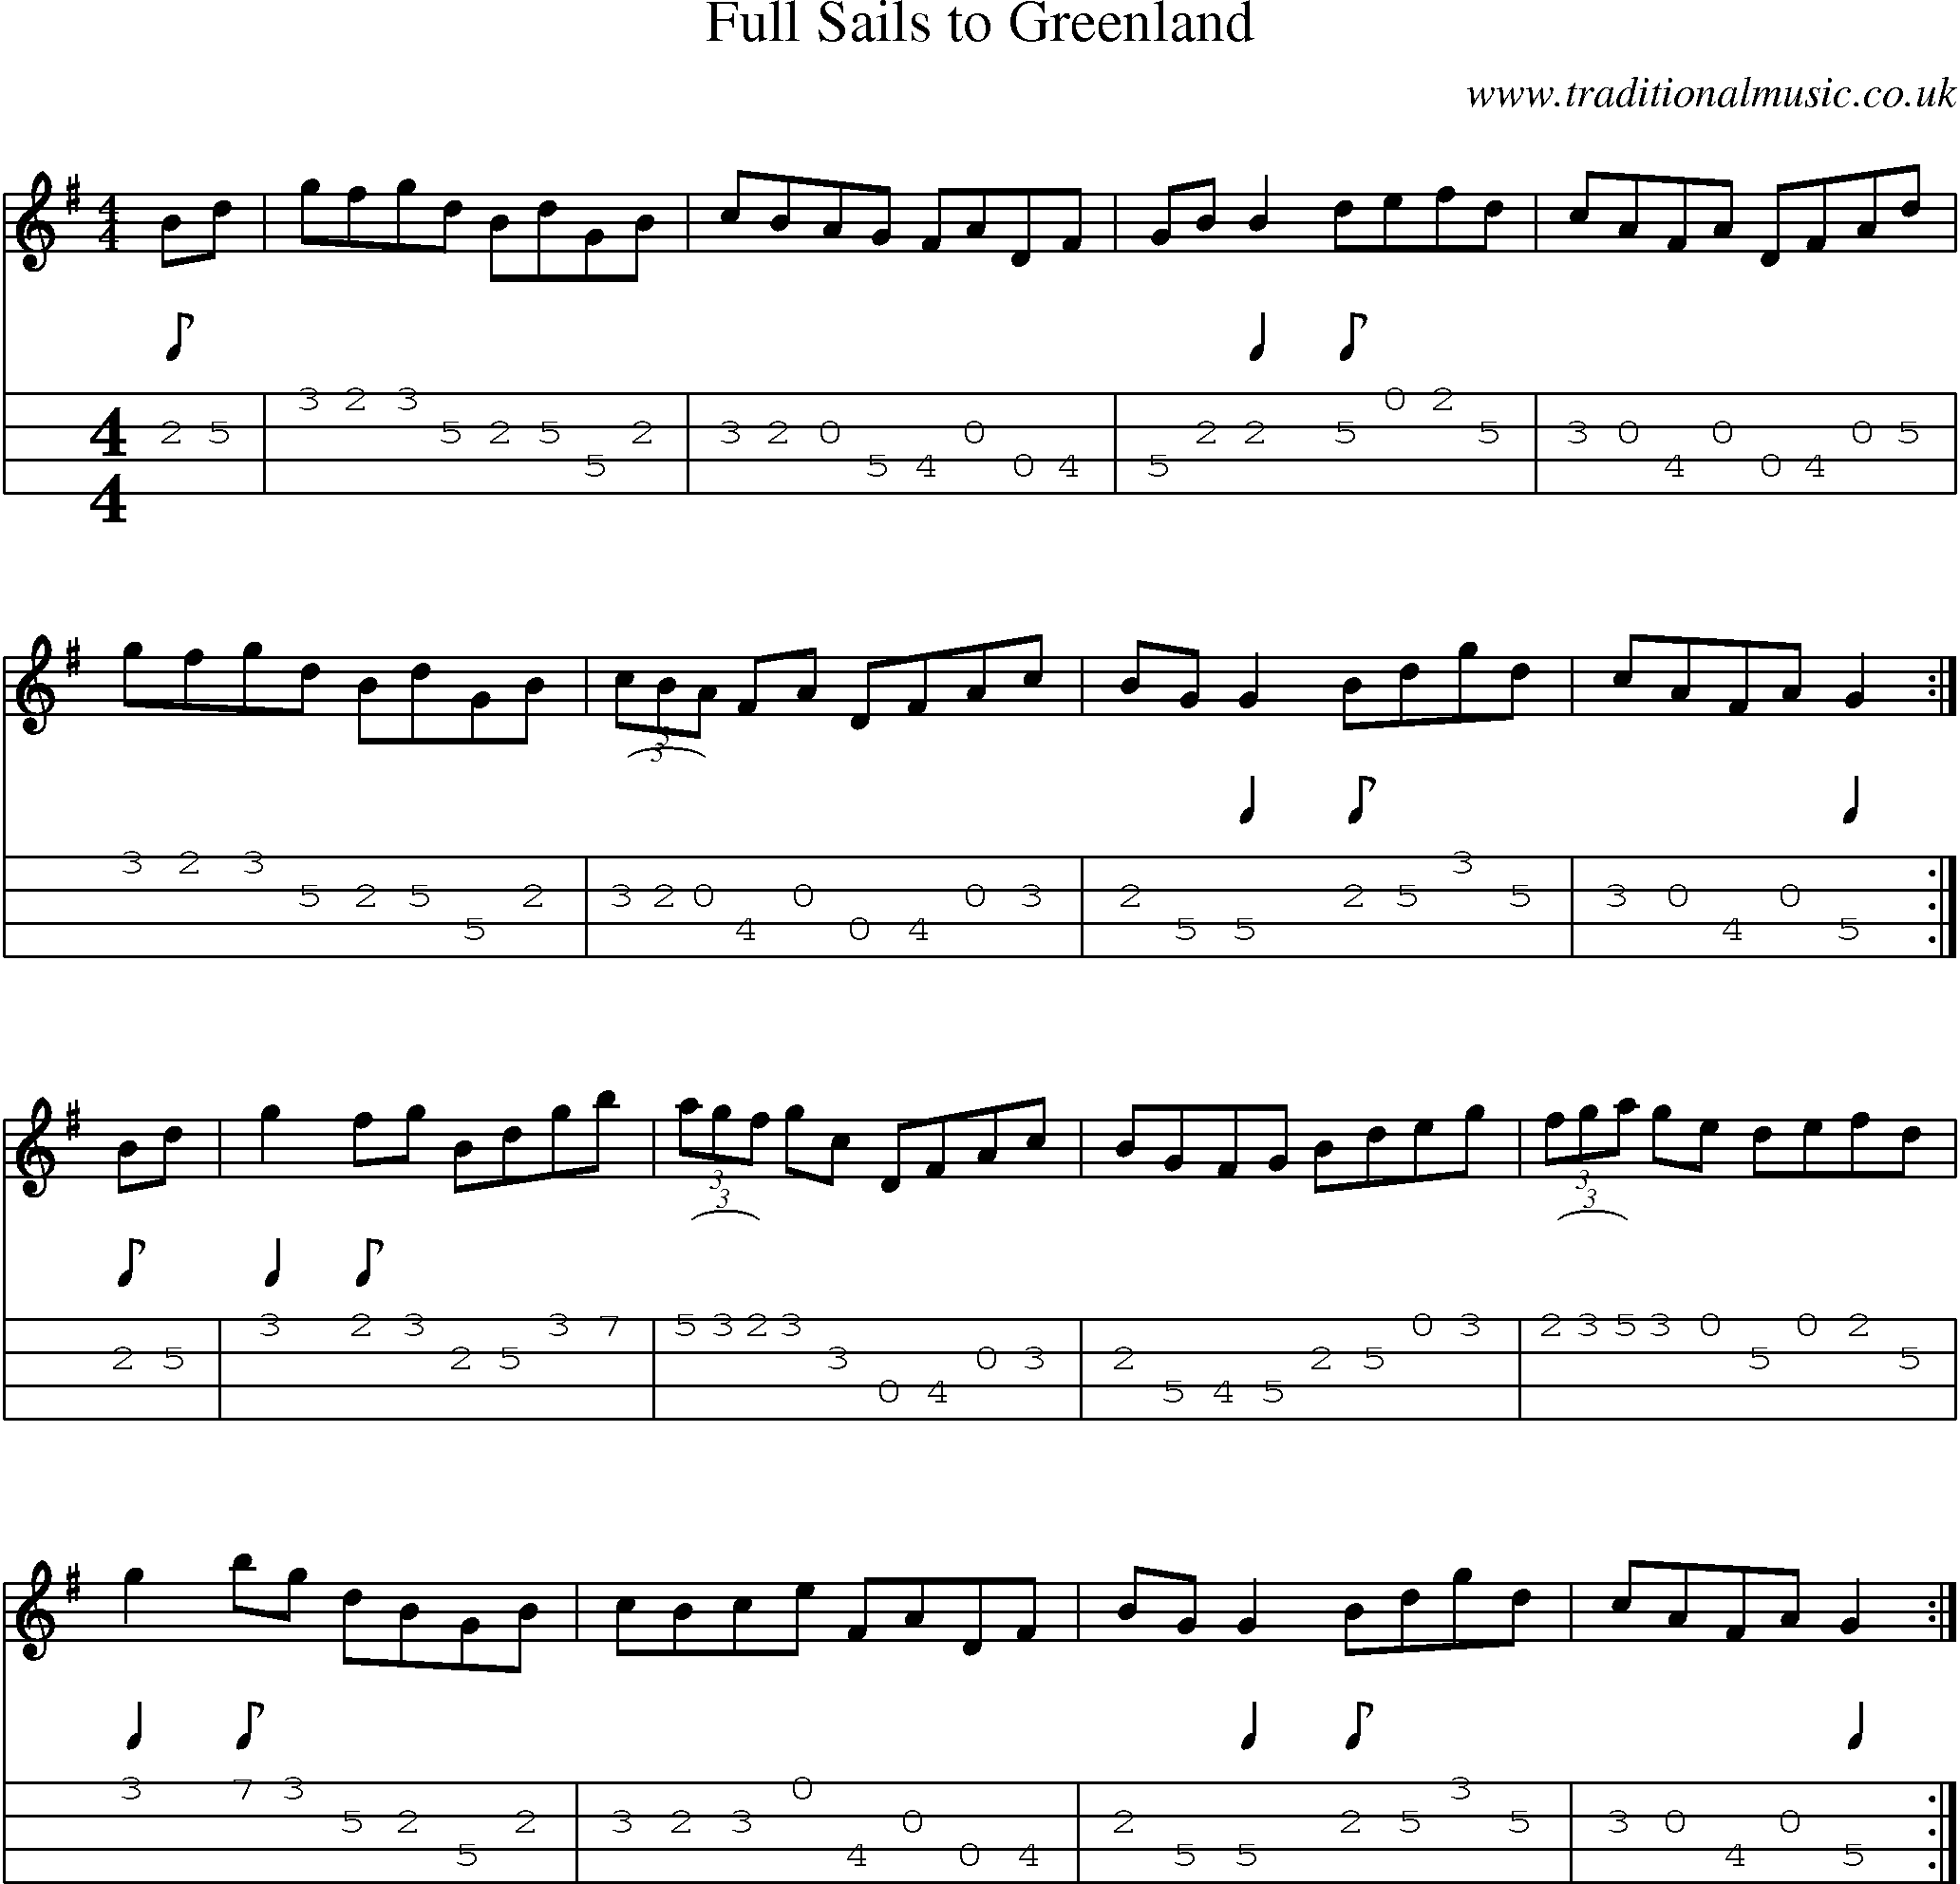 Music Score and Mandolin Tabs for Full Sails To Greenland